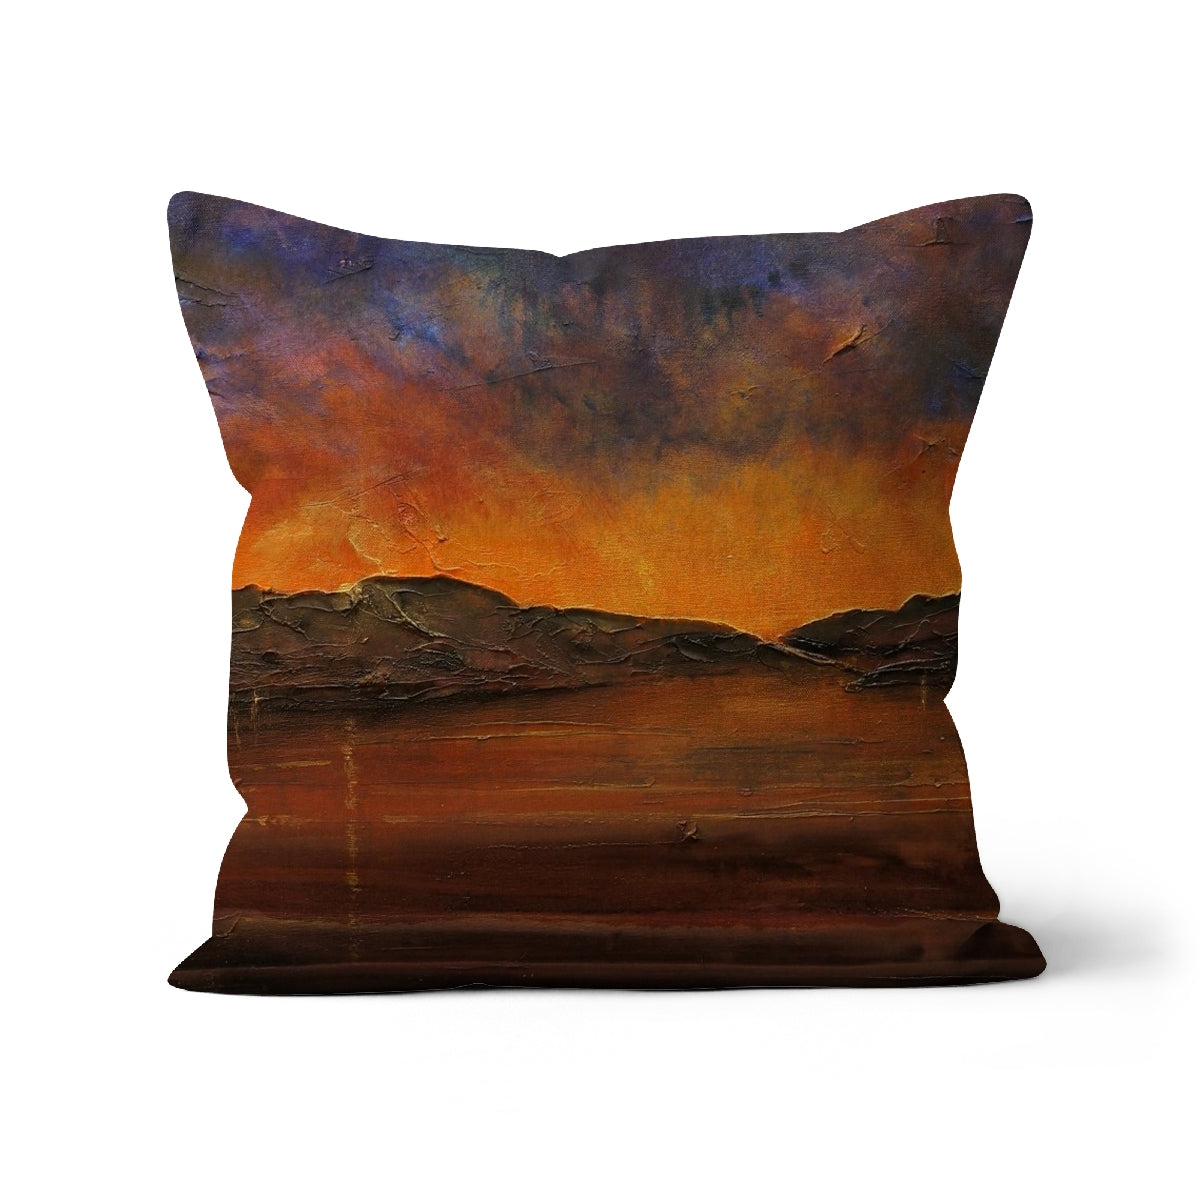 A Brooding Clyde Dusk Art Gifts Cushion-Cushions-River Clyde Art Gallery-Faux Suede-18"x18"-Paintings, Prints, Homeware, Art Gifts From Scotland By Scottish Artist Kevin Hunter